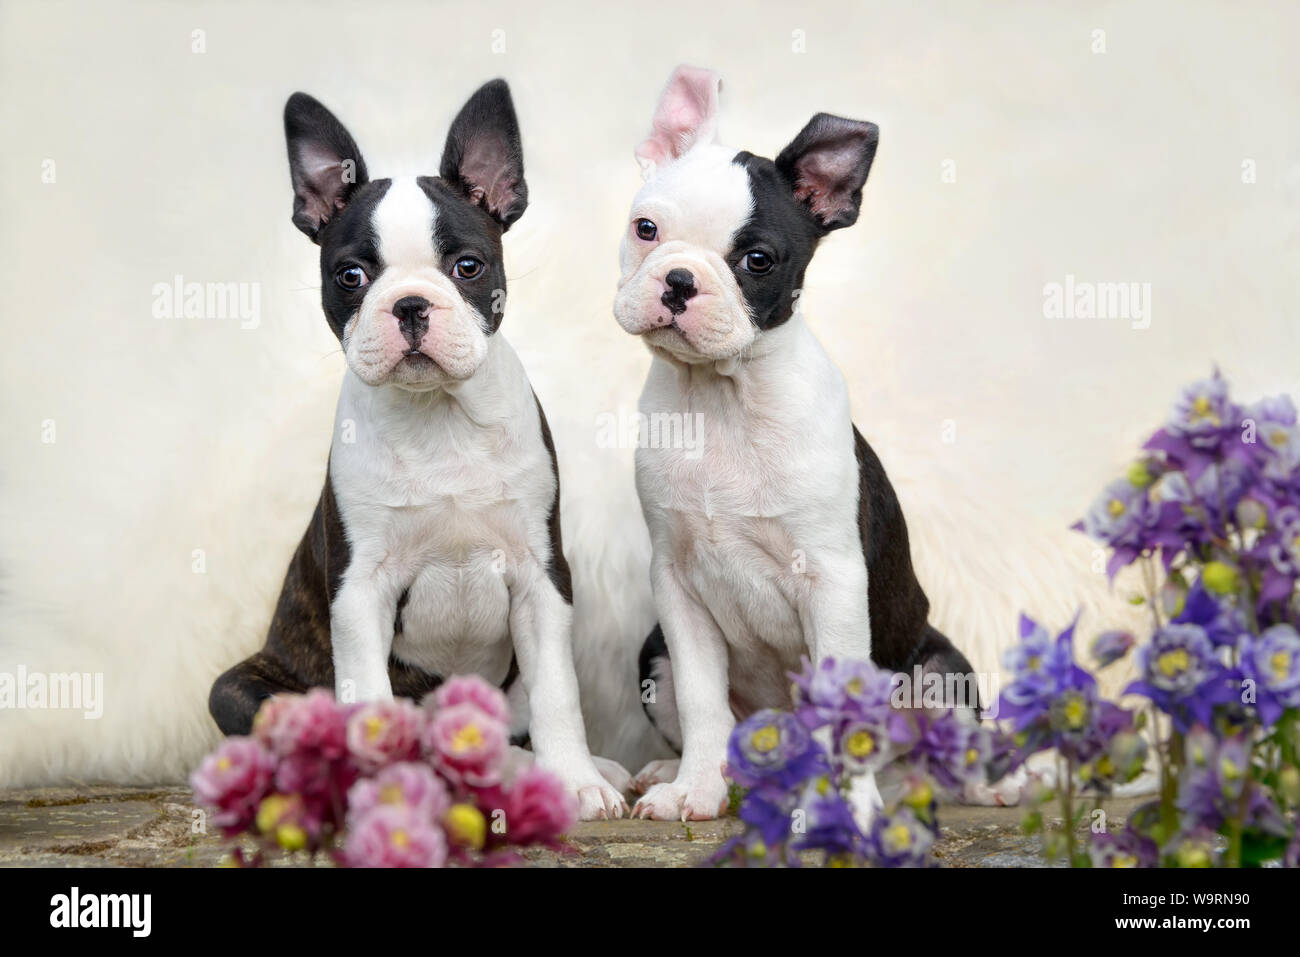 Two cute young puppies Boston Terrier dogs, also called Boston Bulls, black with white markings, sitting side by side Stock Photo